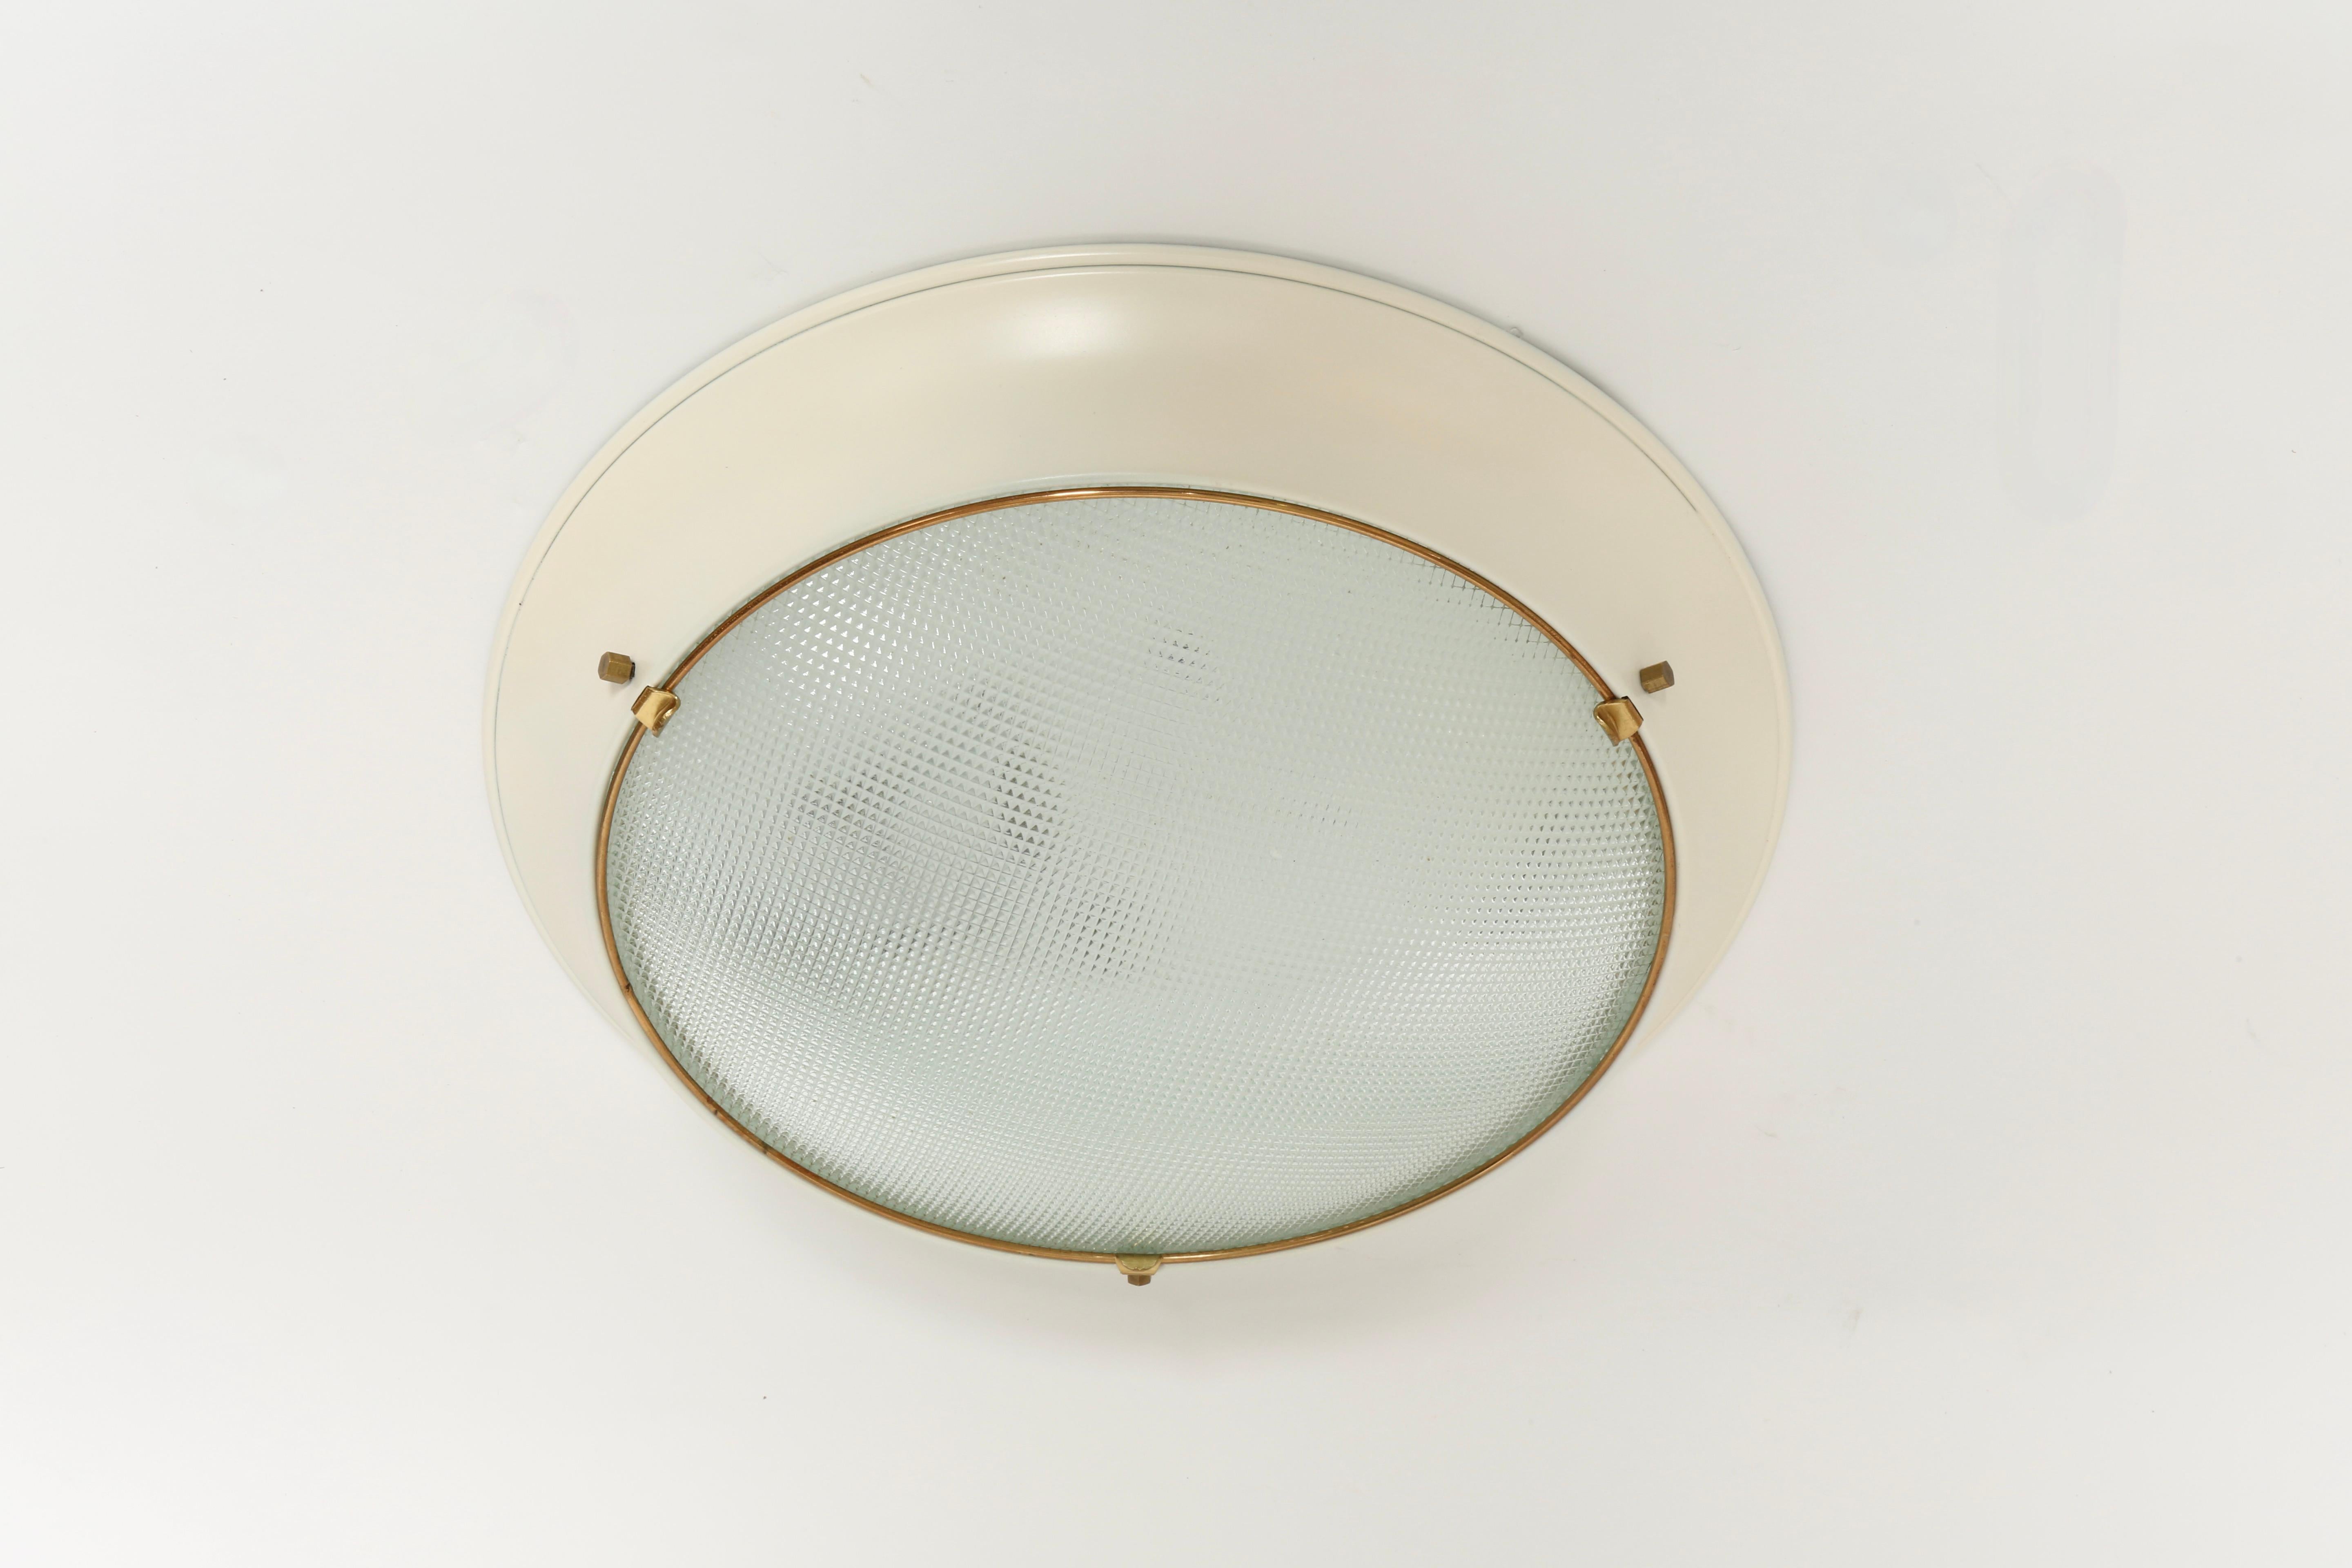 Stilnovo Style Flush Mount Ceiling Light In Good Condition For Sale In Brooklyn, NY